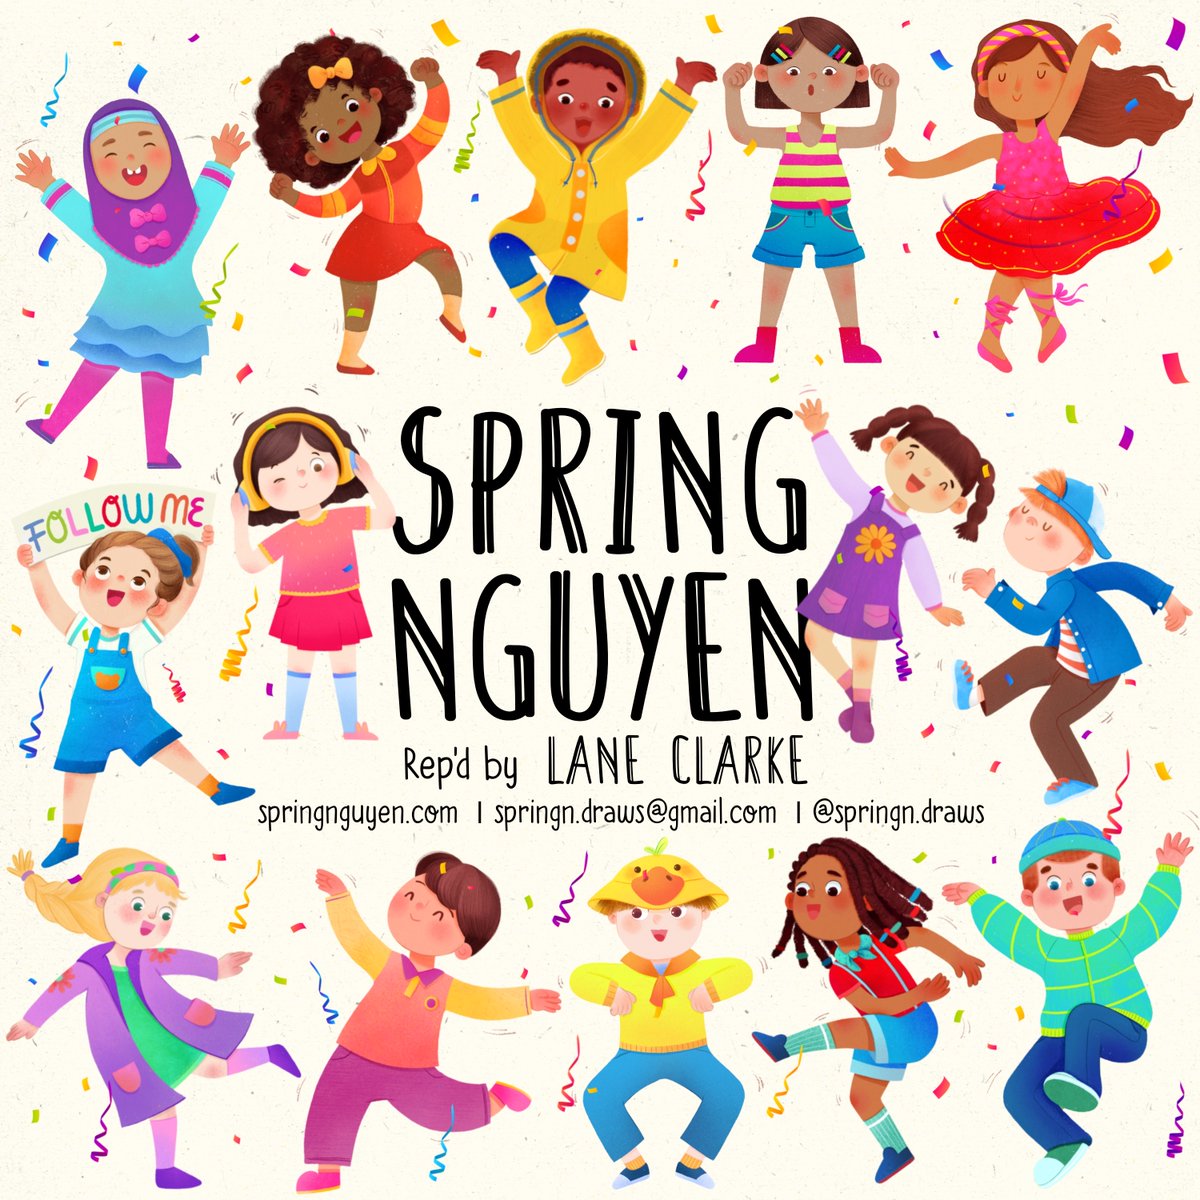 Hello #KidLitArtPostcard🎉. I'm Spring Nguyen, an illustrator/designer rep'd by
@lanewriteswords 😚, specializing in picture books,  board books and other magic goodies✨
.
💌springn.draws@gmail.com  
🌈springnguyen.com
#kidlitart #kidlitartists #childrenbook #illustration